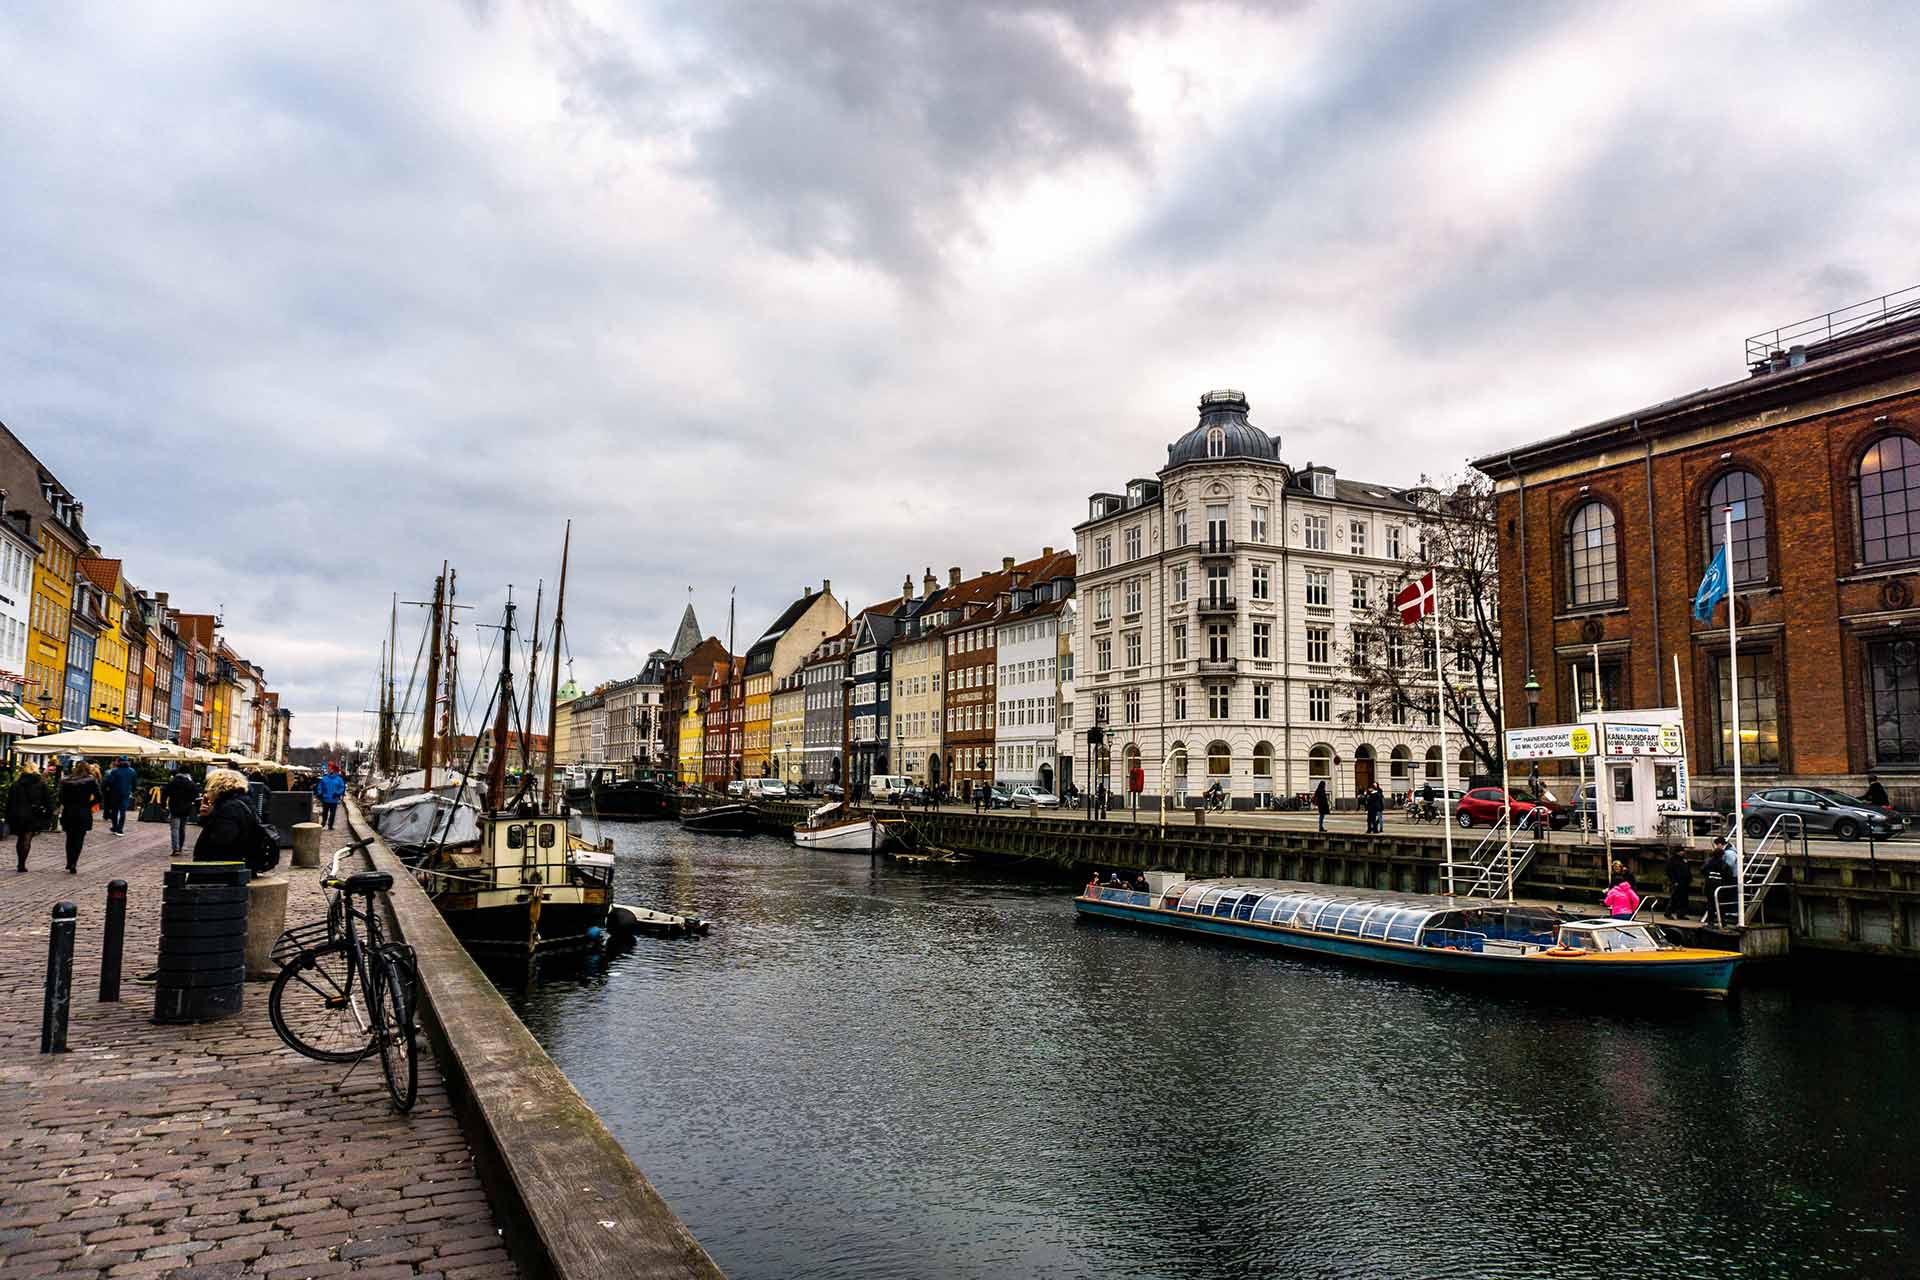 Danish city on a cloudy day